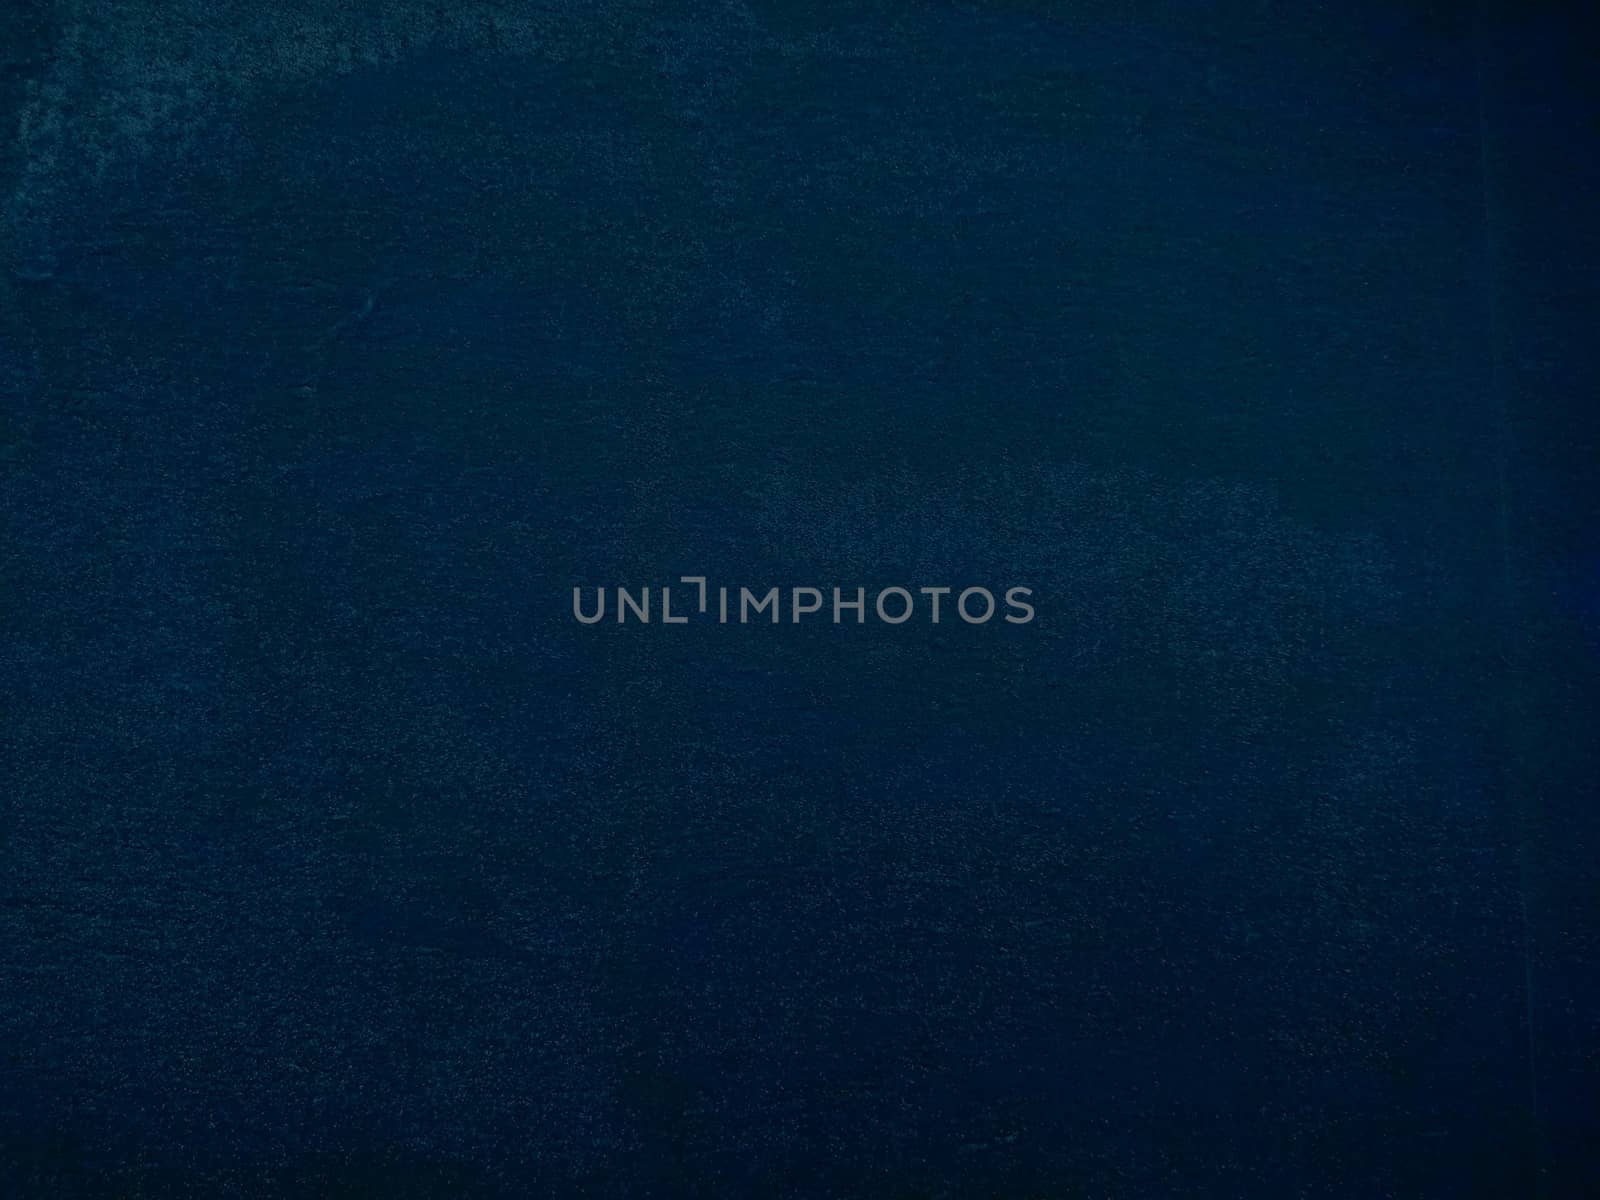 Dark blue pattern background with painted texture. Blue graphic for white text content by sonandonures